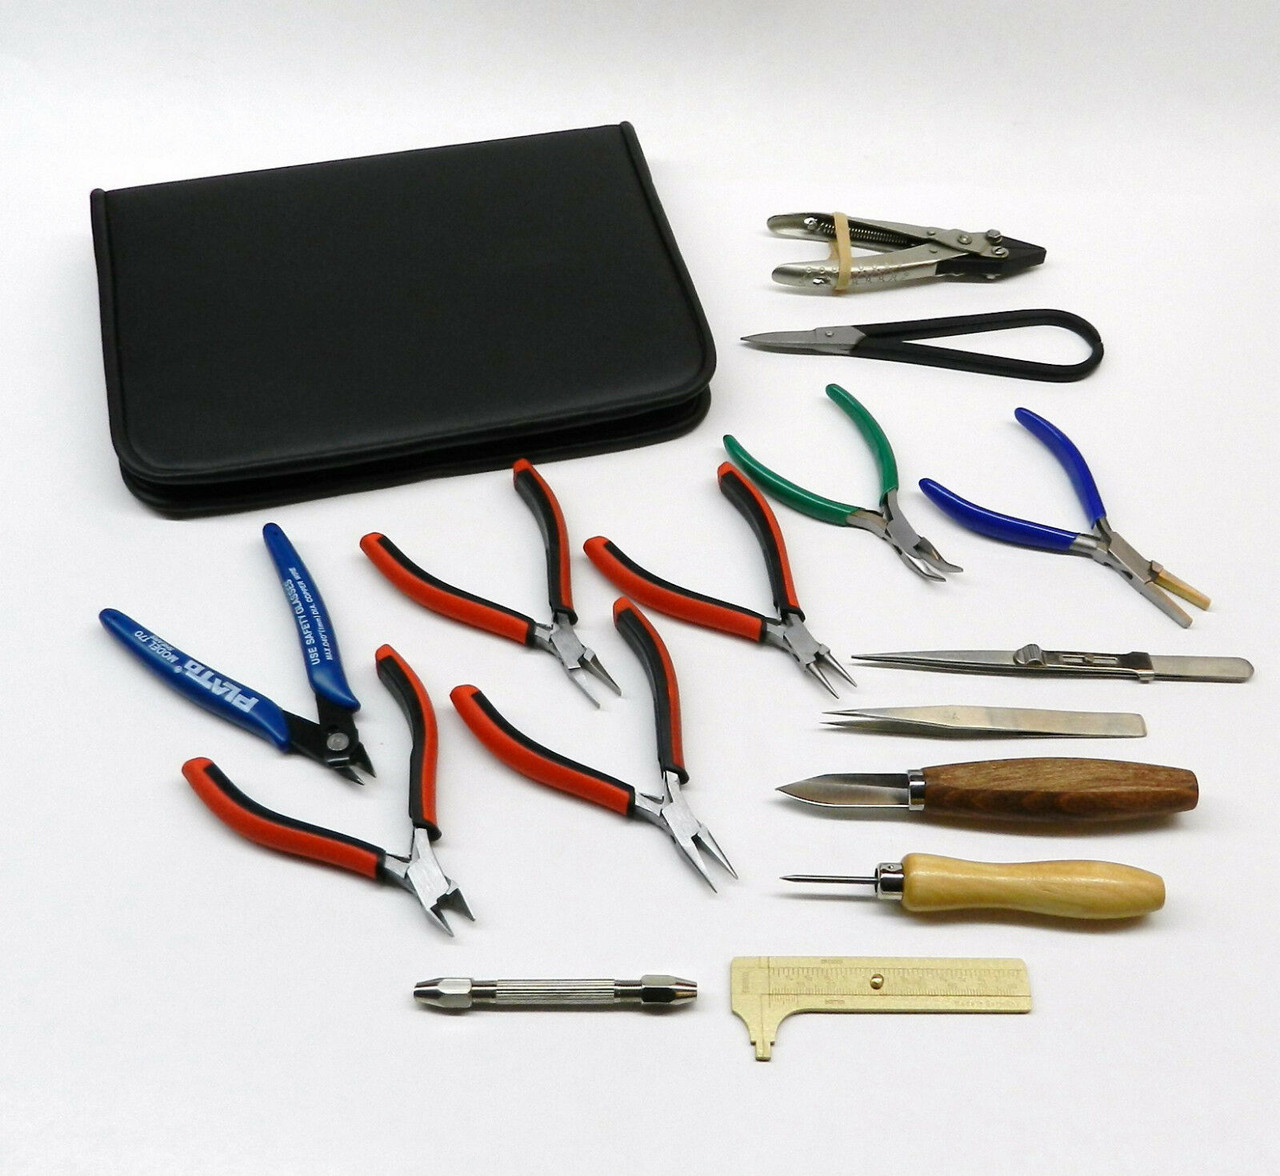 Jewelry Making Tools Hand Tool Kit For Bead working Hobby Model